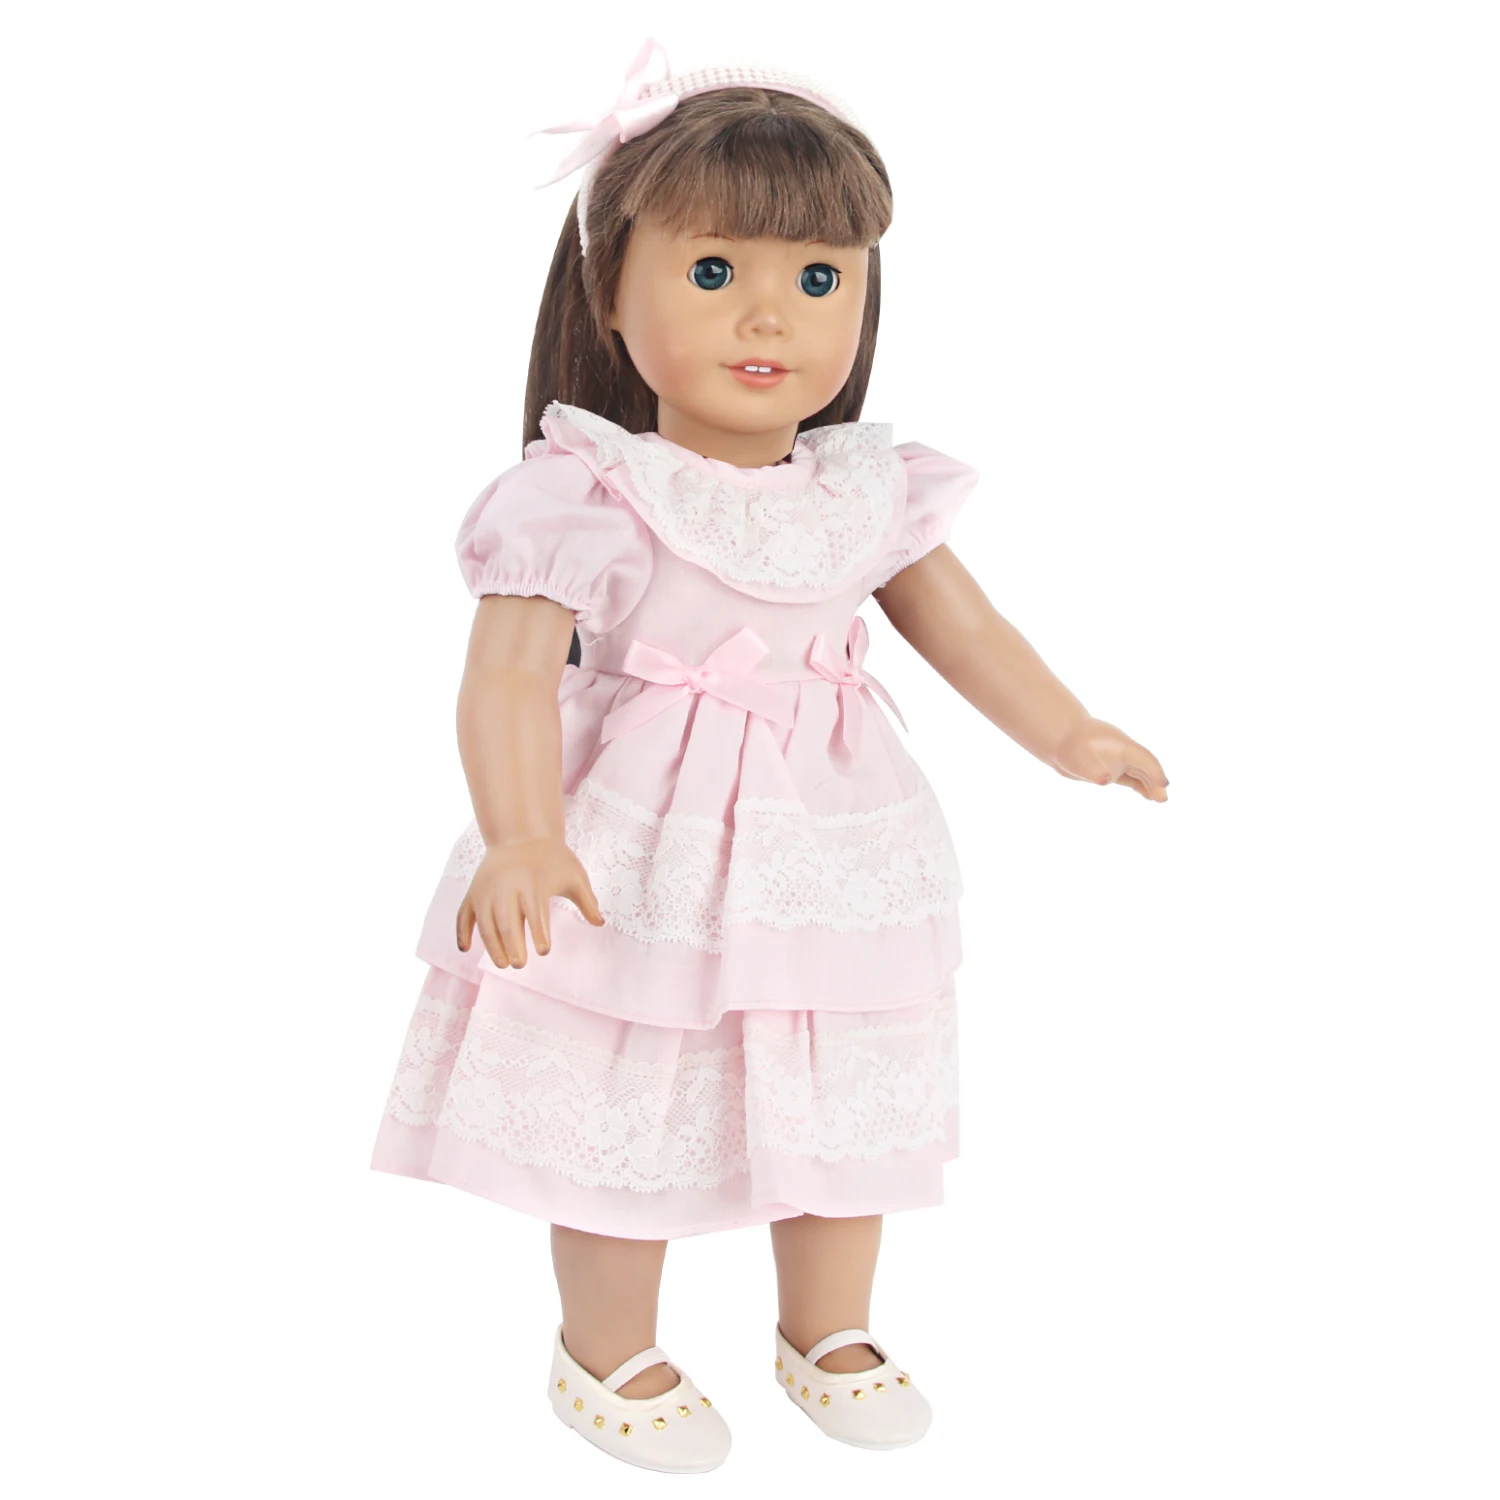 Hot Selling Doll Clothing Doll Pink Dress Clothes for 18 Inch American Doll Girl